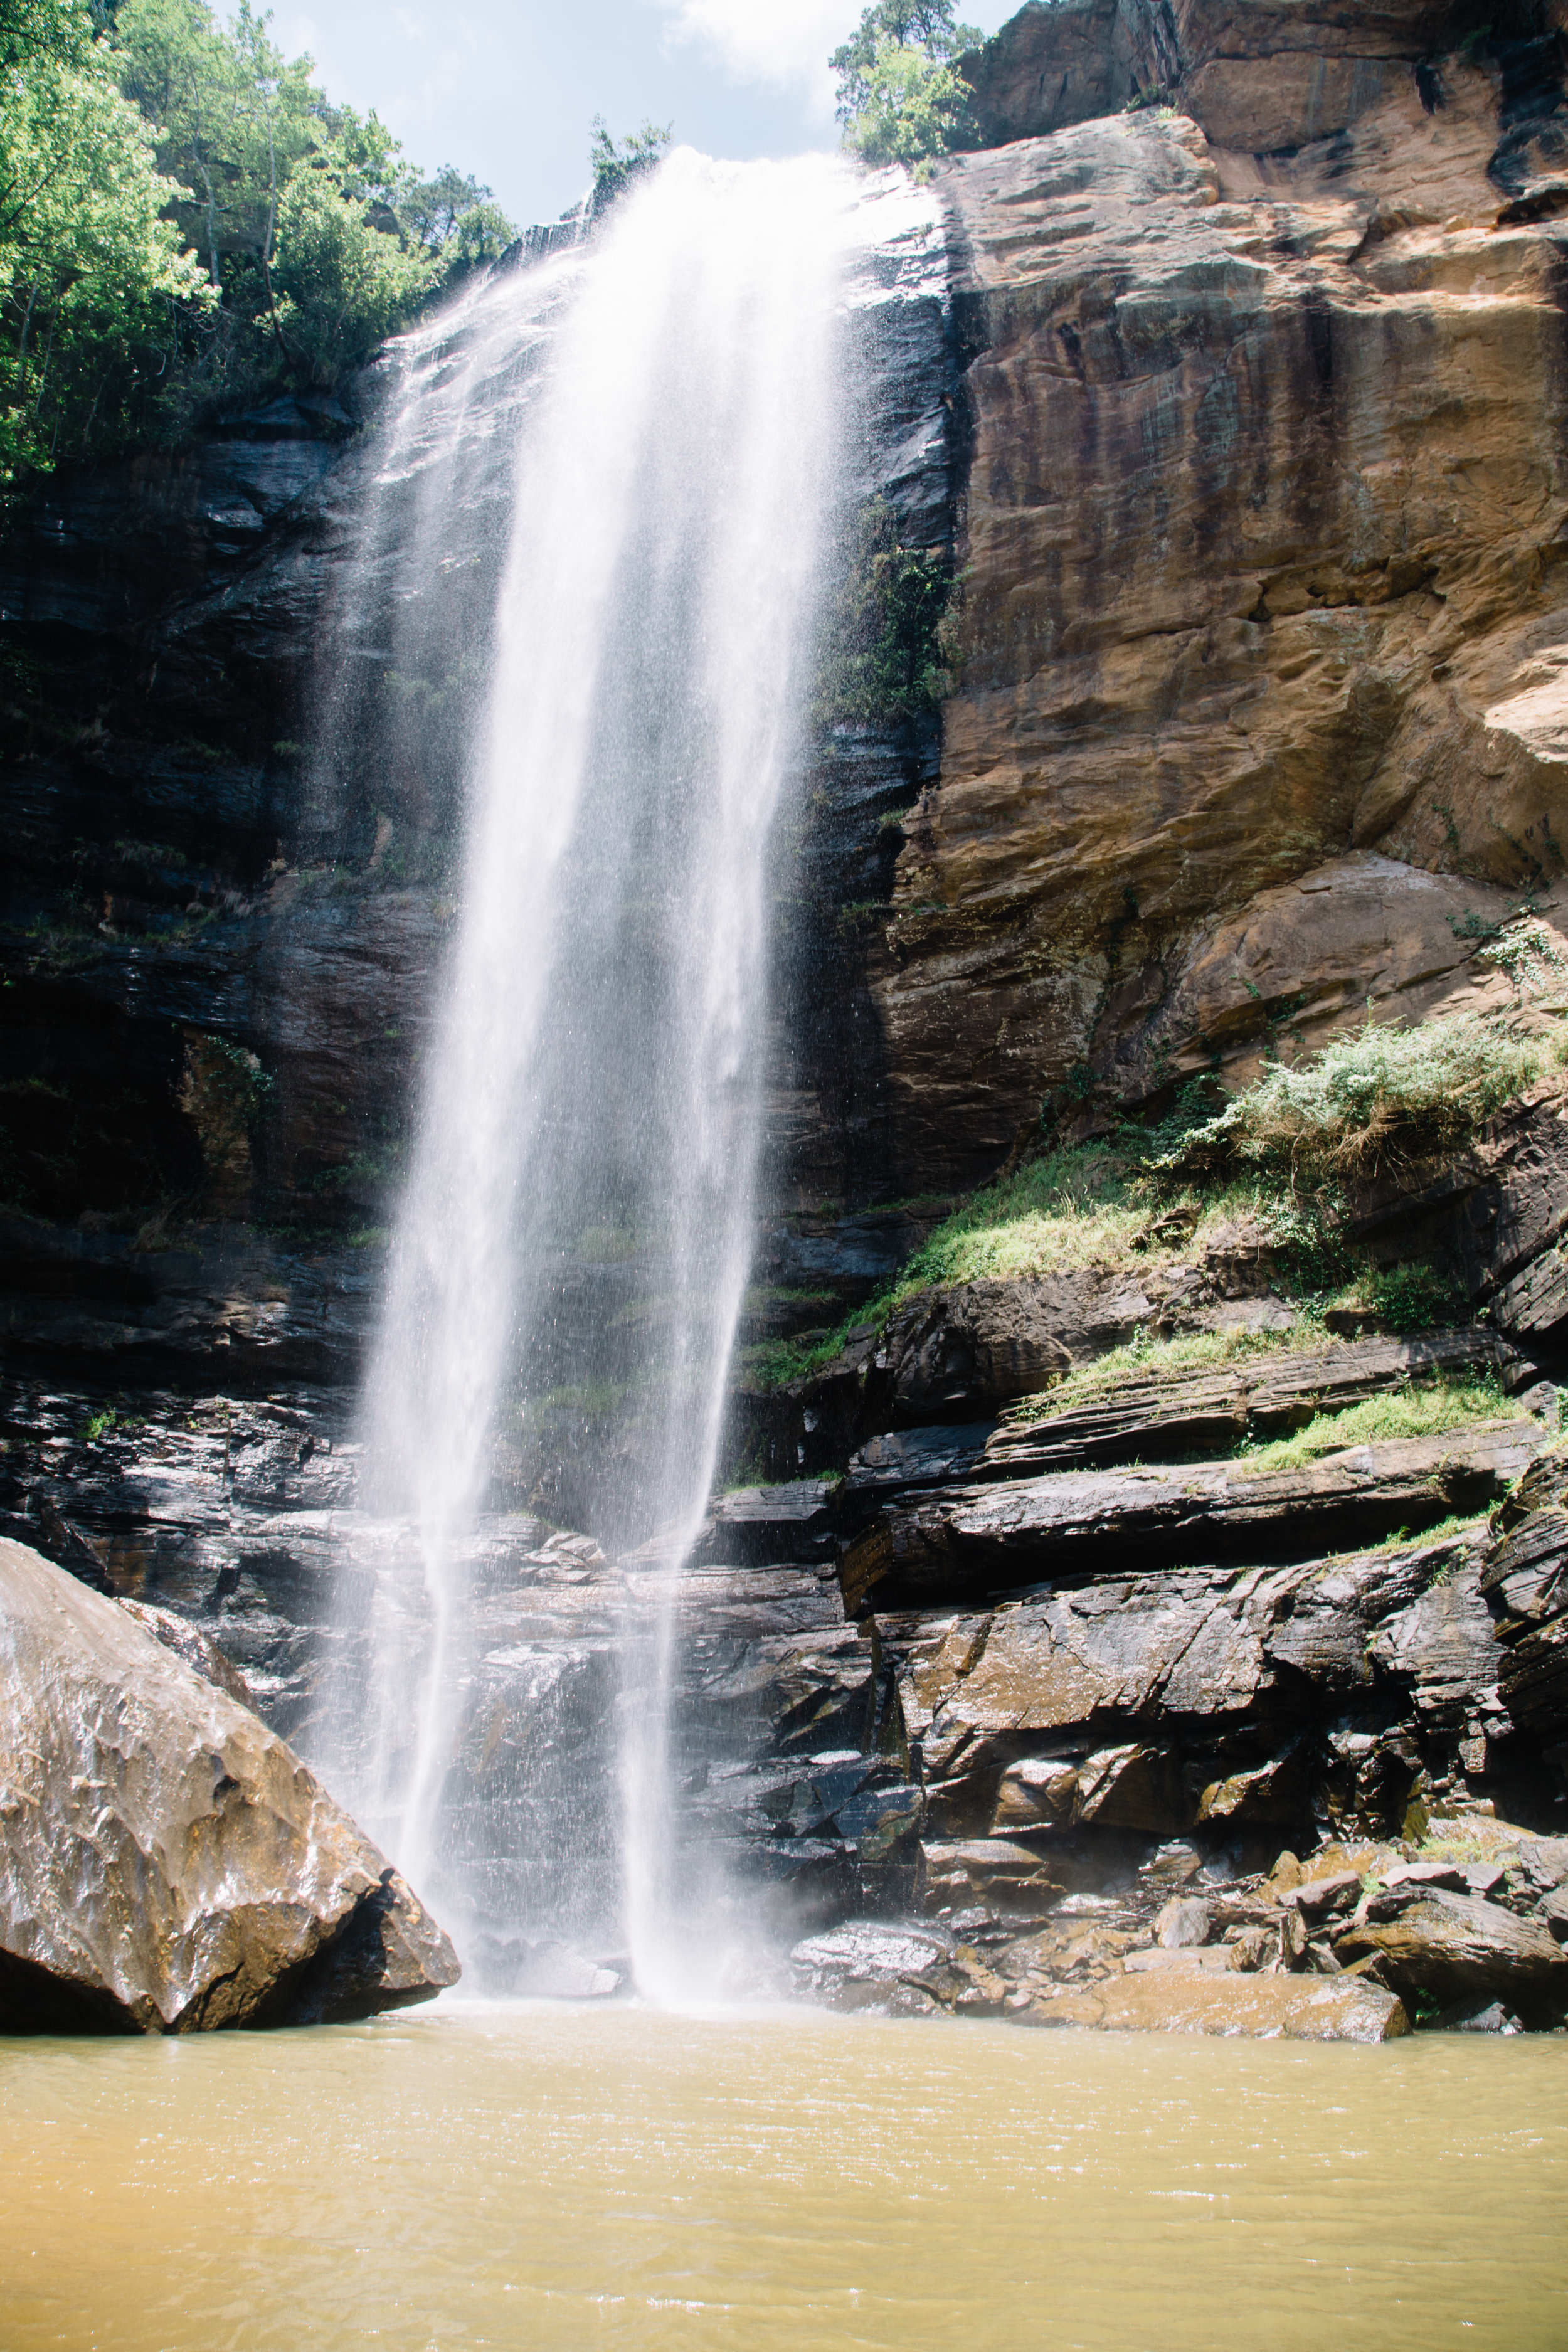 Love waterfalls? Check out this Georgia summer day guide at MoreDetours.com.